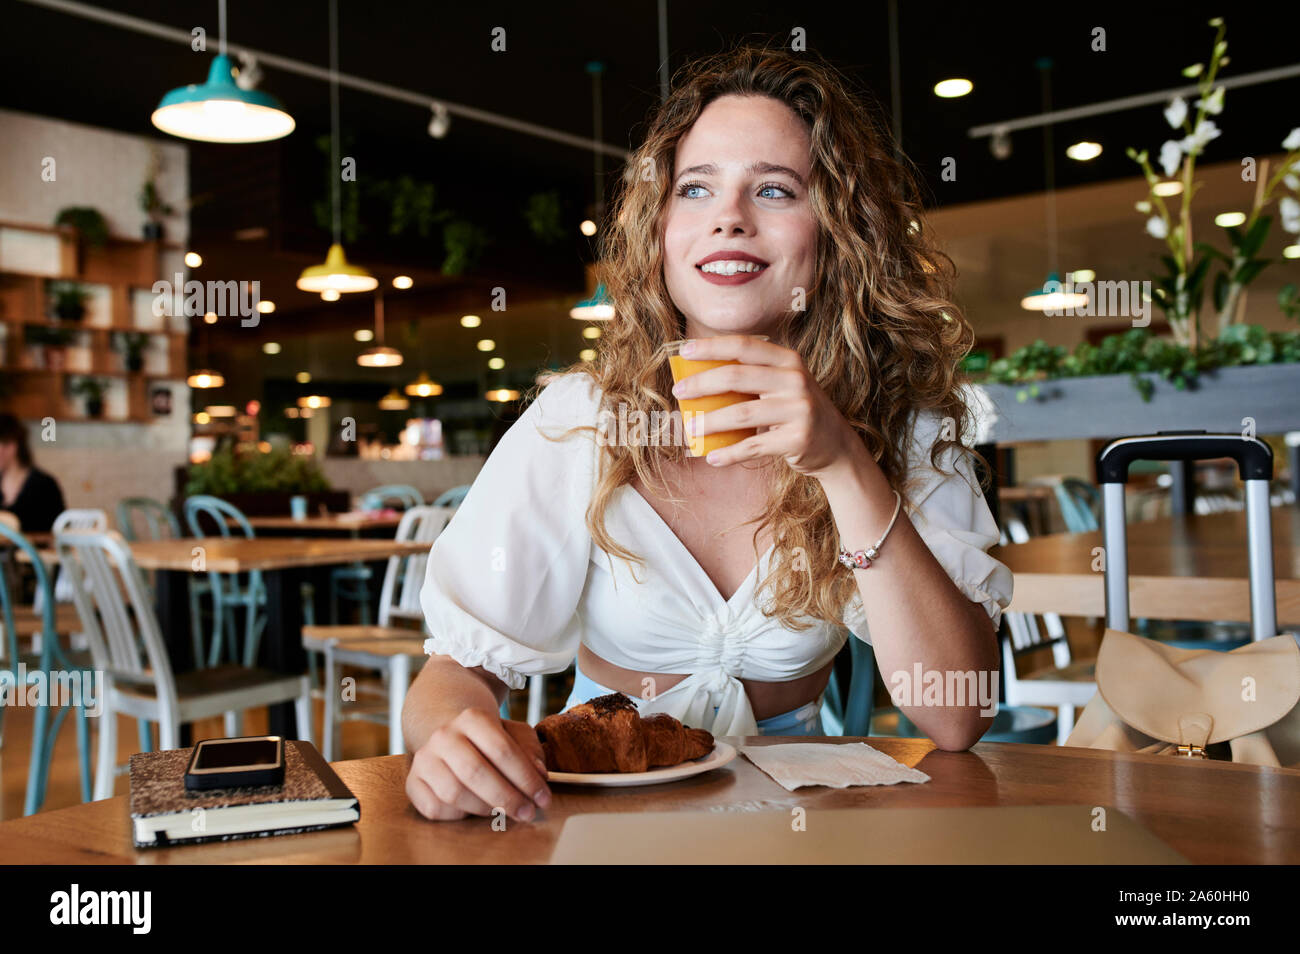 Smiling young woman in a cafe having breakfast Stock Photo